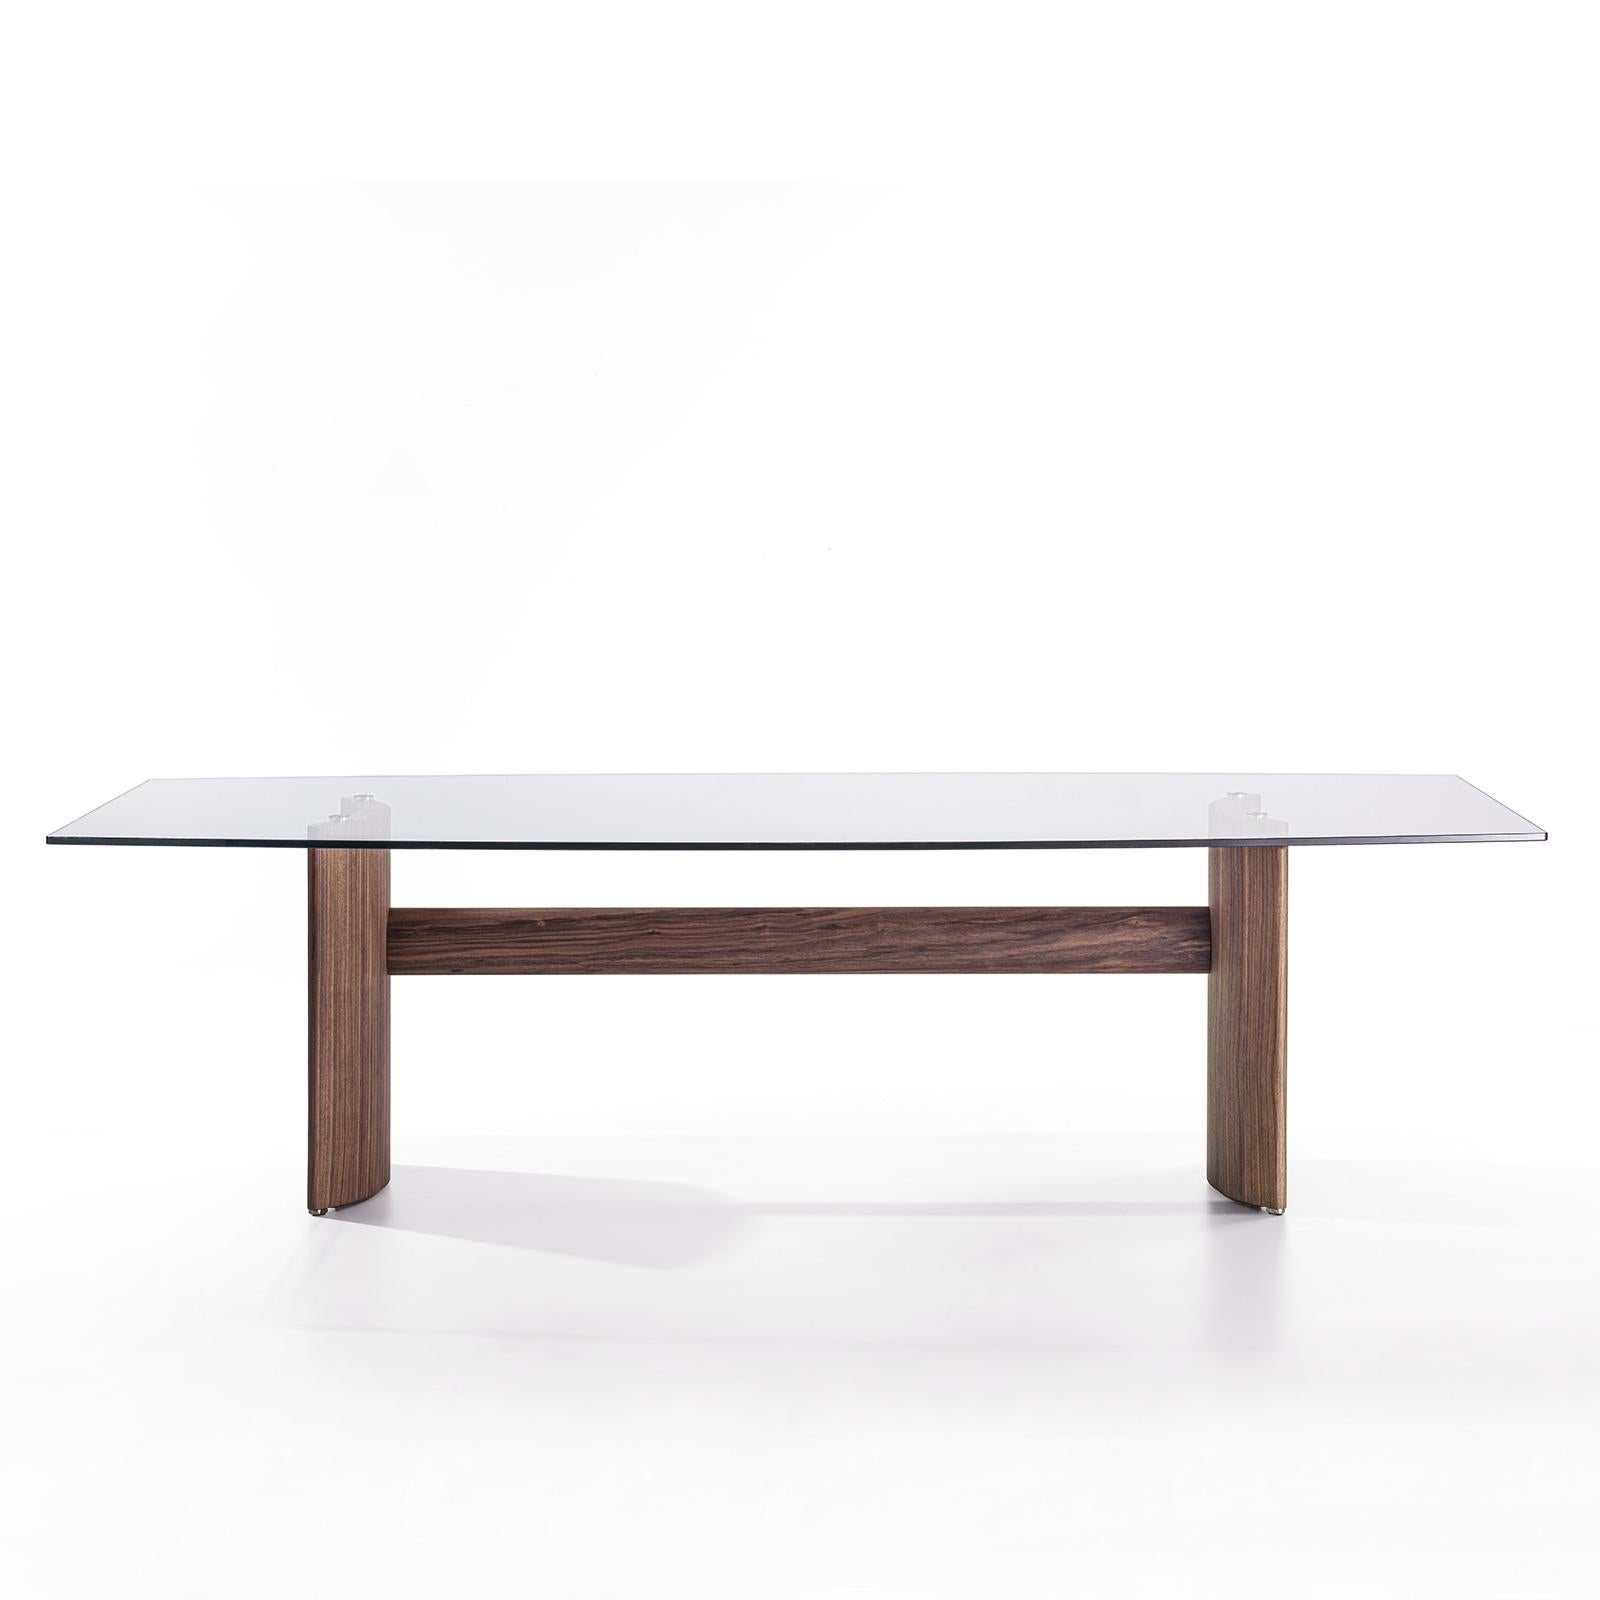 Dining table around Walnut with 2 curved solid 
walnut bases and with curved shaped clear glass top.
Available on request in:
L130 to 140cm x D 110 to 120 cm x H 72cm, price: 12500,00€
L140 to 160cmxD110 to 120cmxH72cm, price: 12900,00€
L160 to